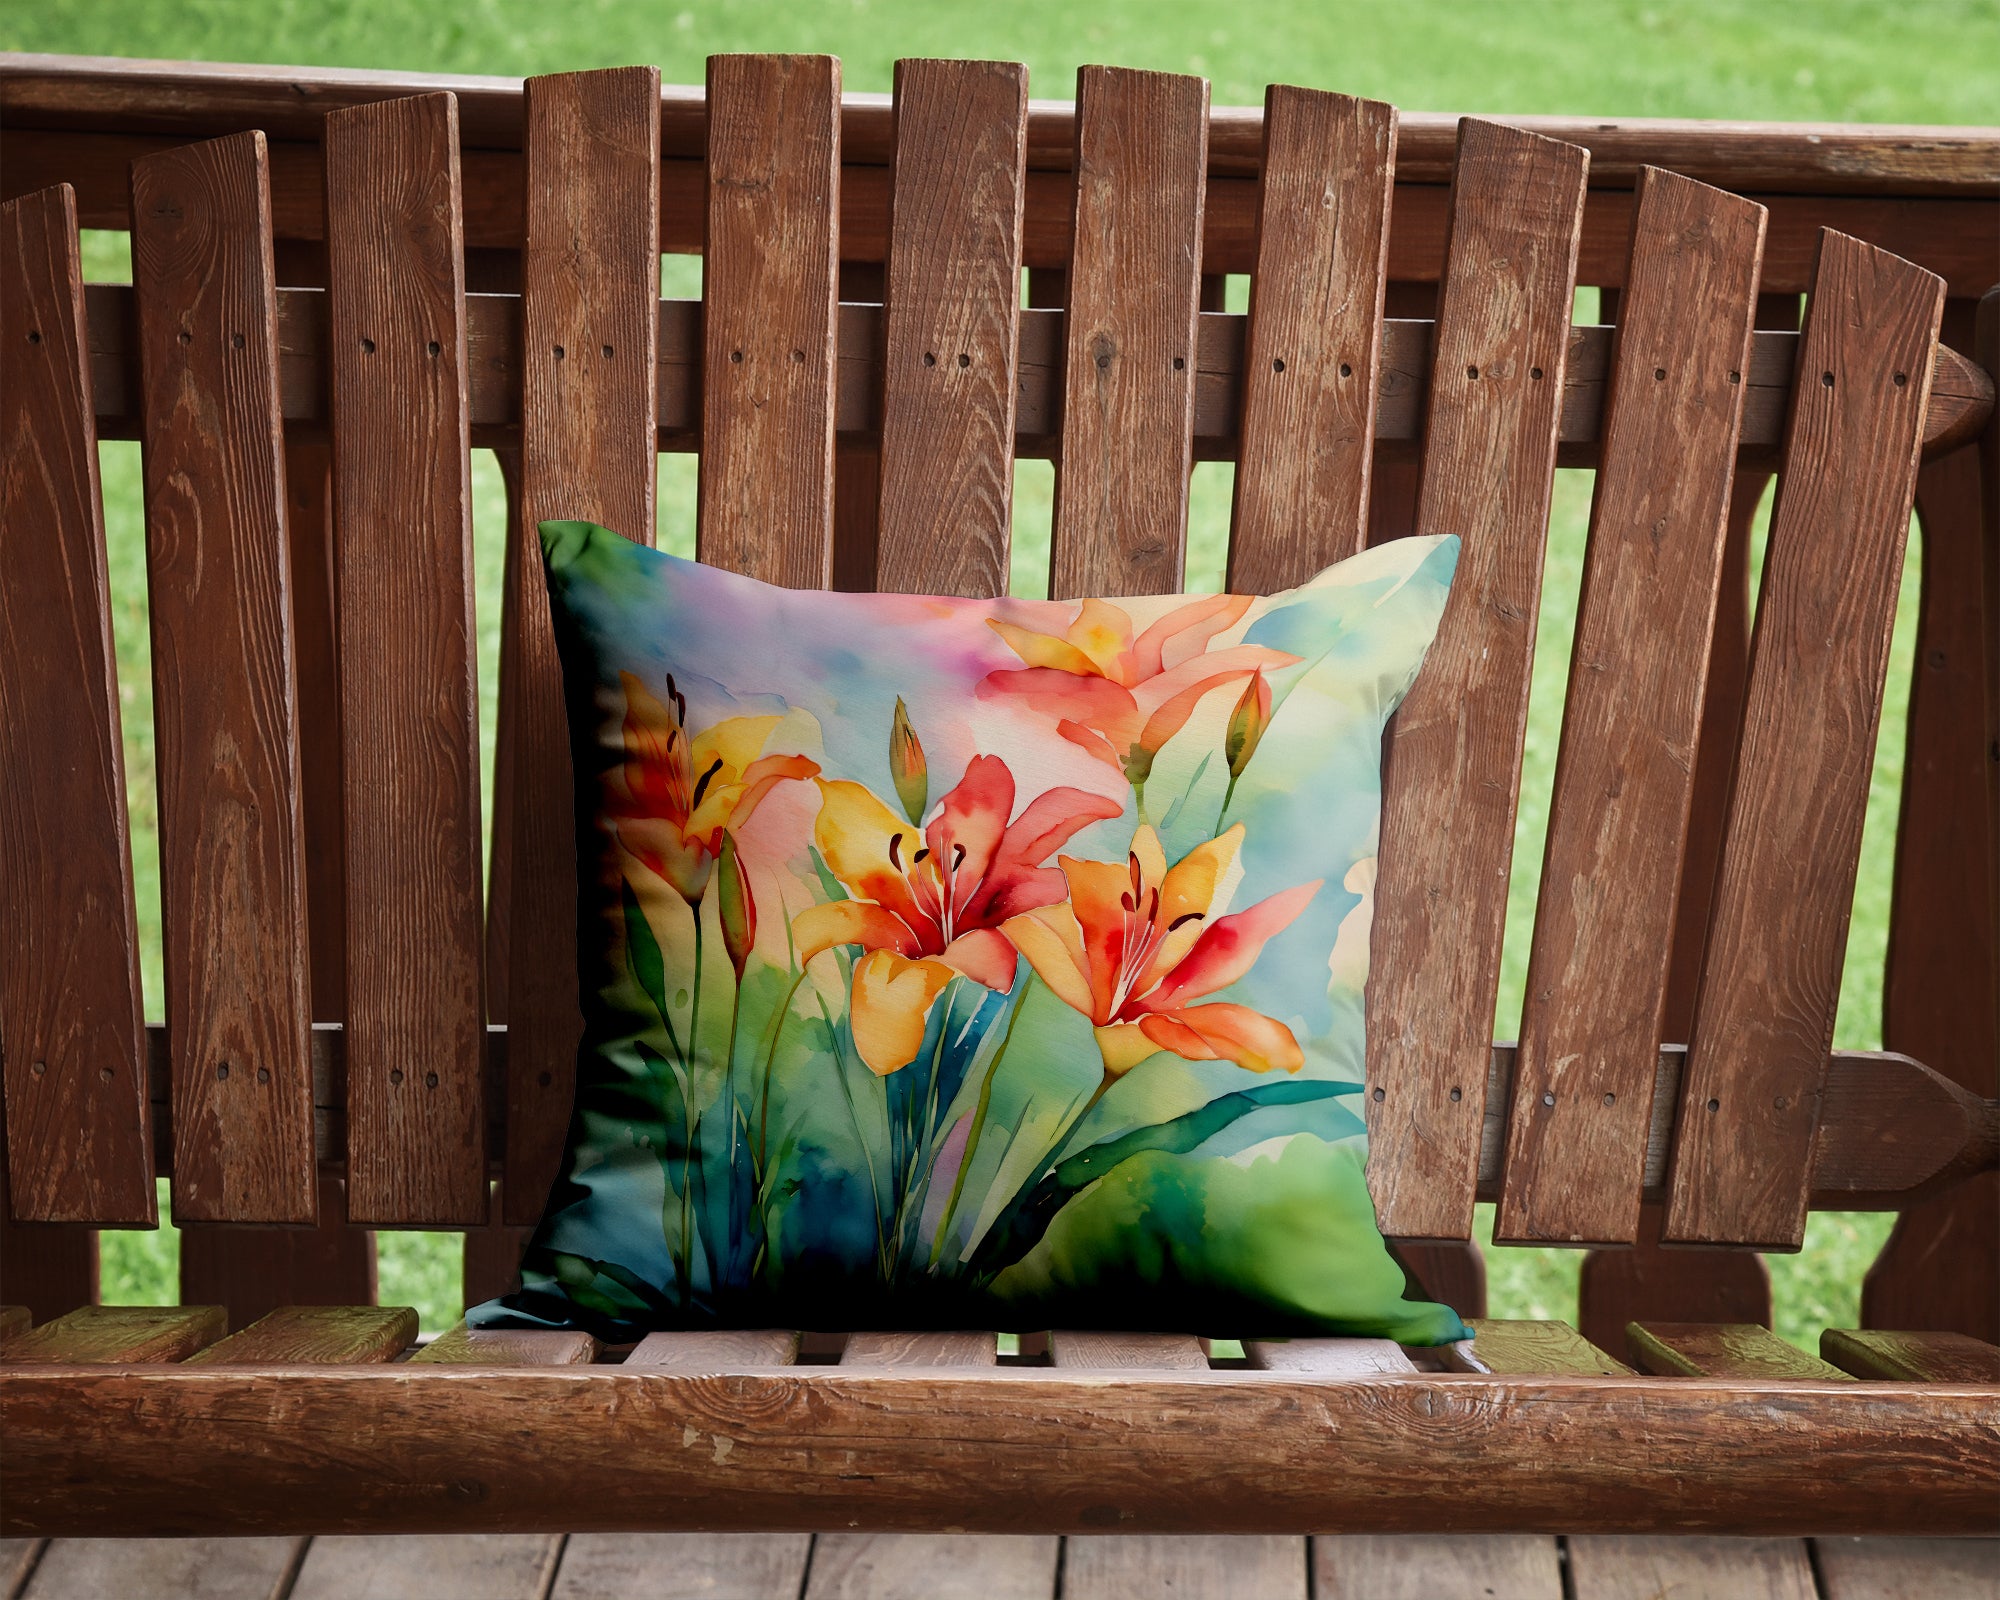 Buy this Lilies in Watercolor Throw Pillow